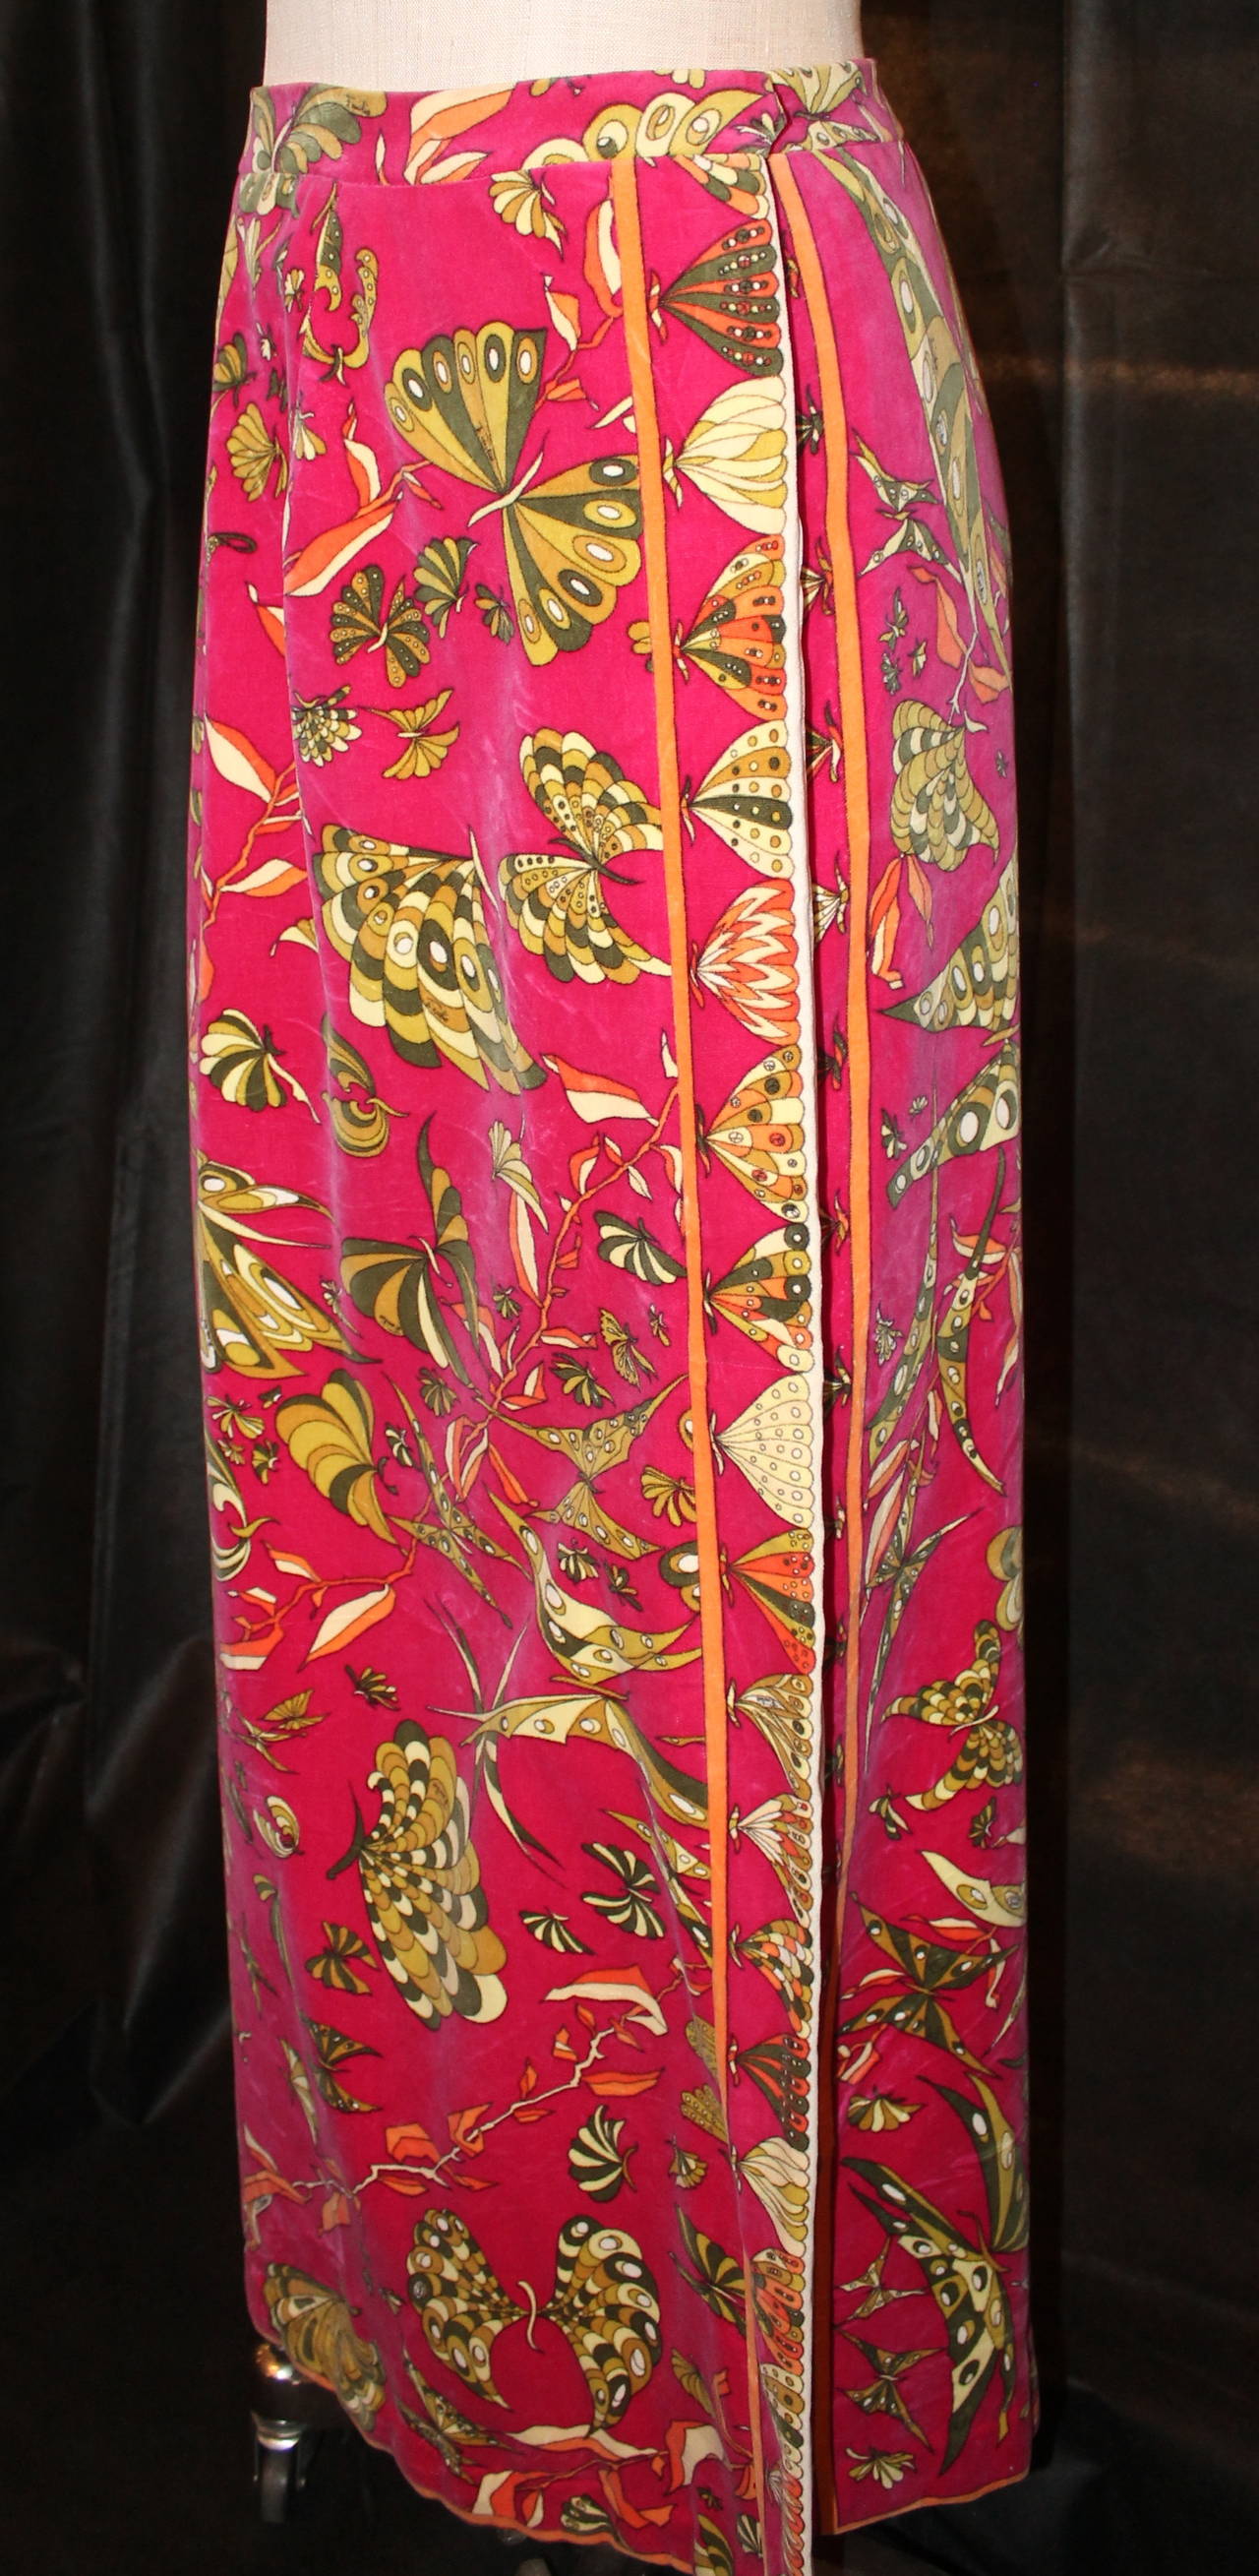 This Pucci Vintage Magenta & Olive Butterfly Velvet Maxi Skirt - circa 1970’s - Size M. This fully lined skirt is in very good vintage condition with very minor fades. The skirt is a snap-on and the snaps can be moved to tighten or give more width.